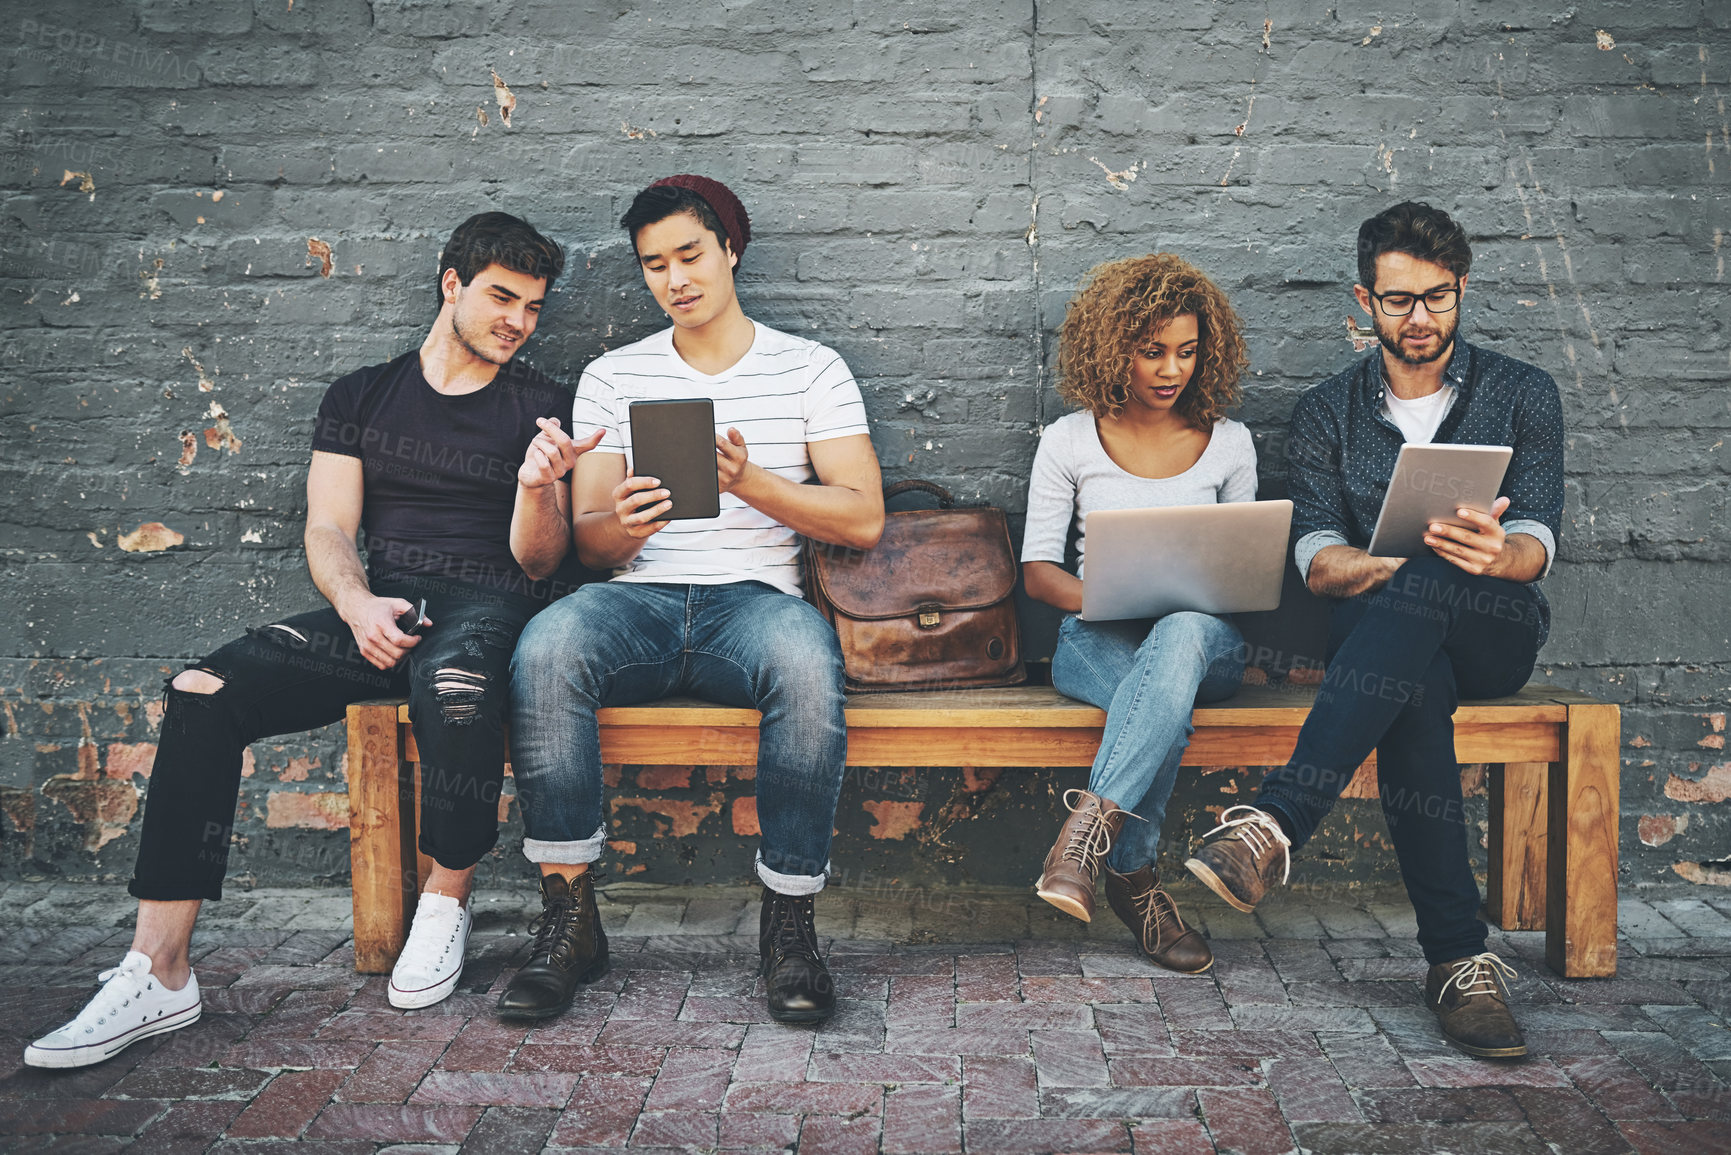 Buy stock photo Shot of a diverse group of people social networking outside